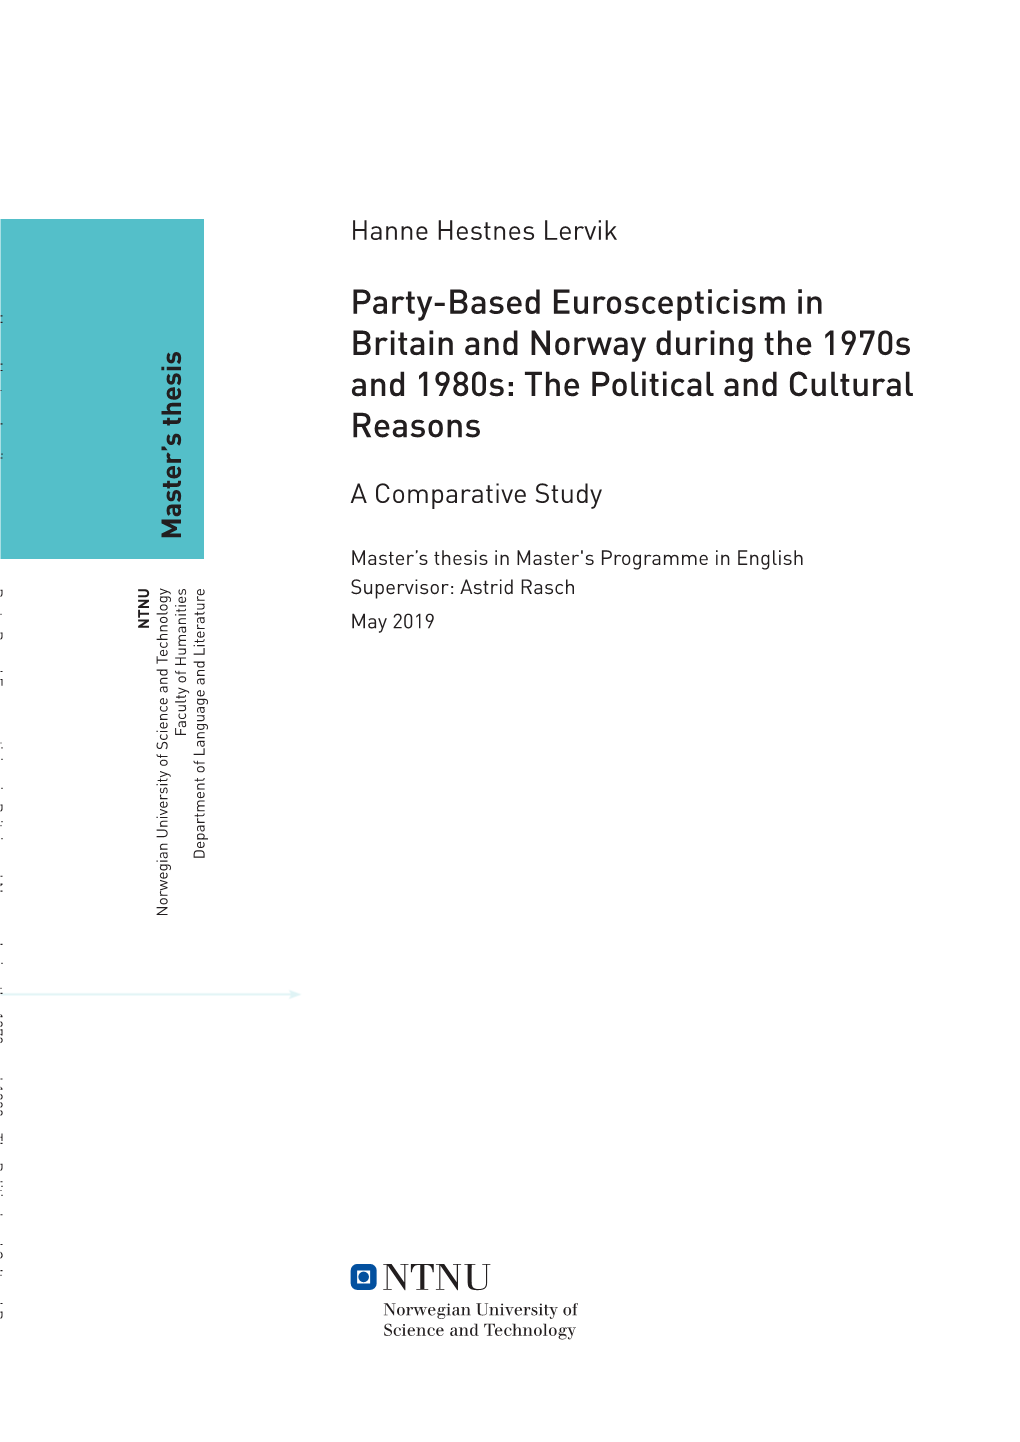 Party-Based Euroscepticism in Britain and Norway During the 1970S and 1980S: the Political and Cultural Reasons